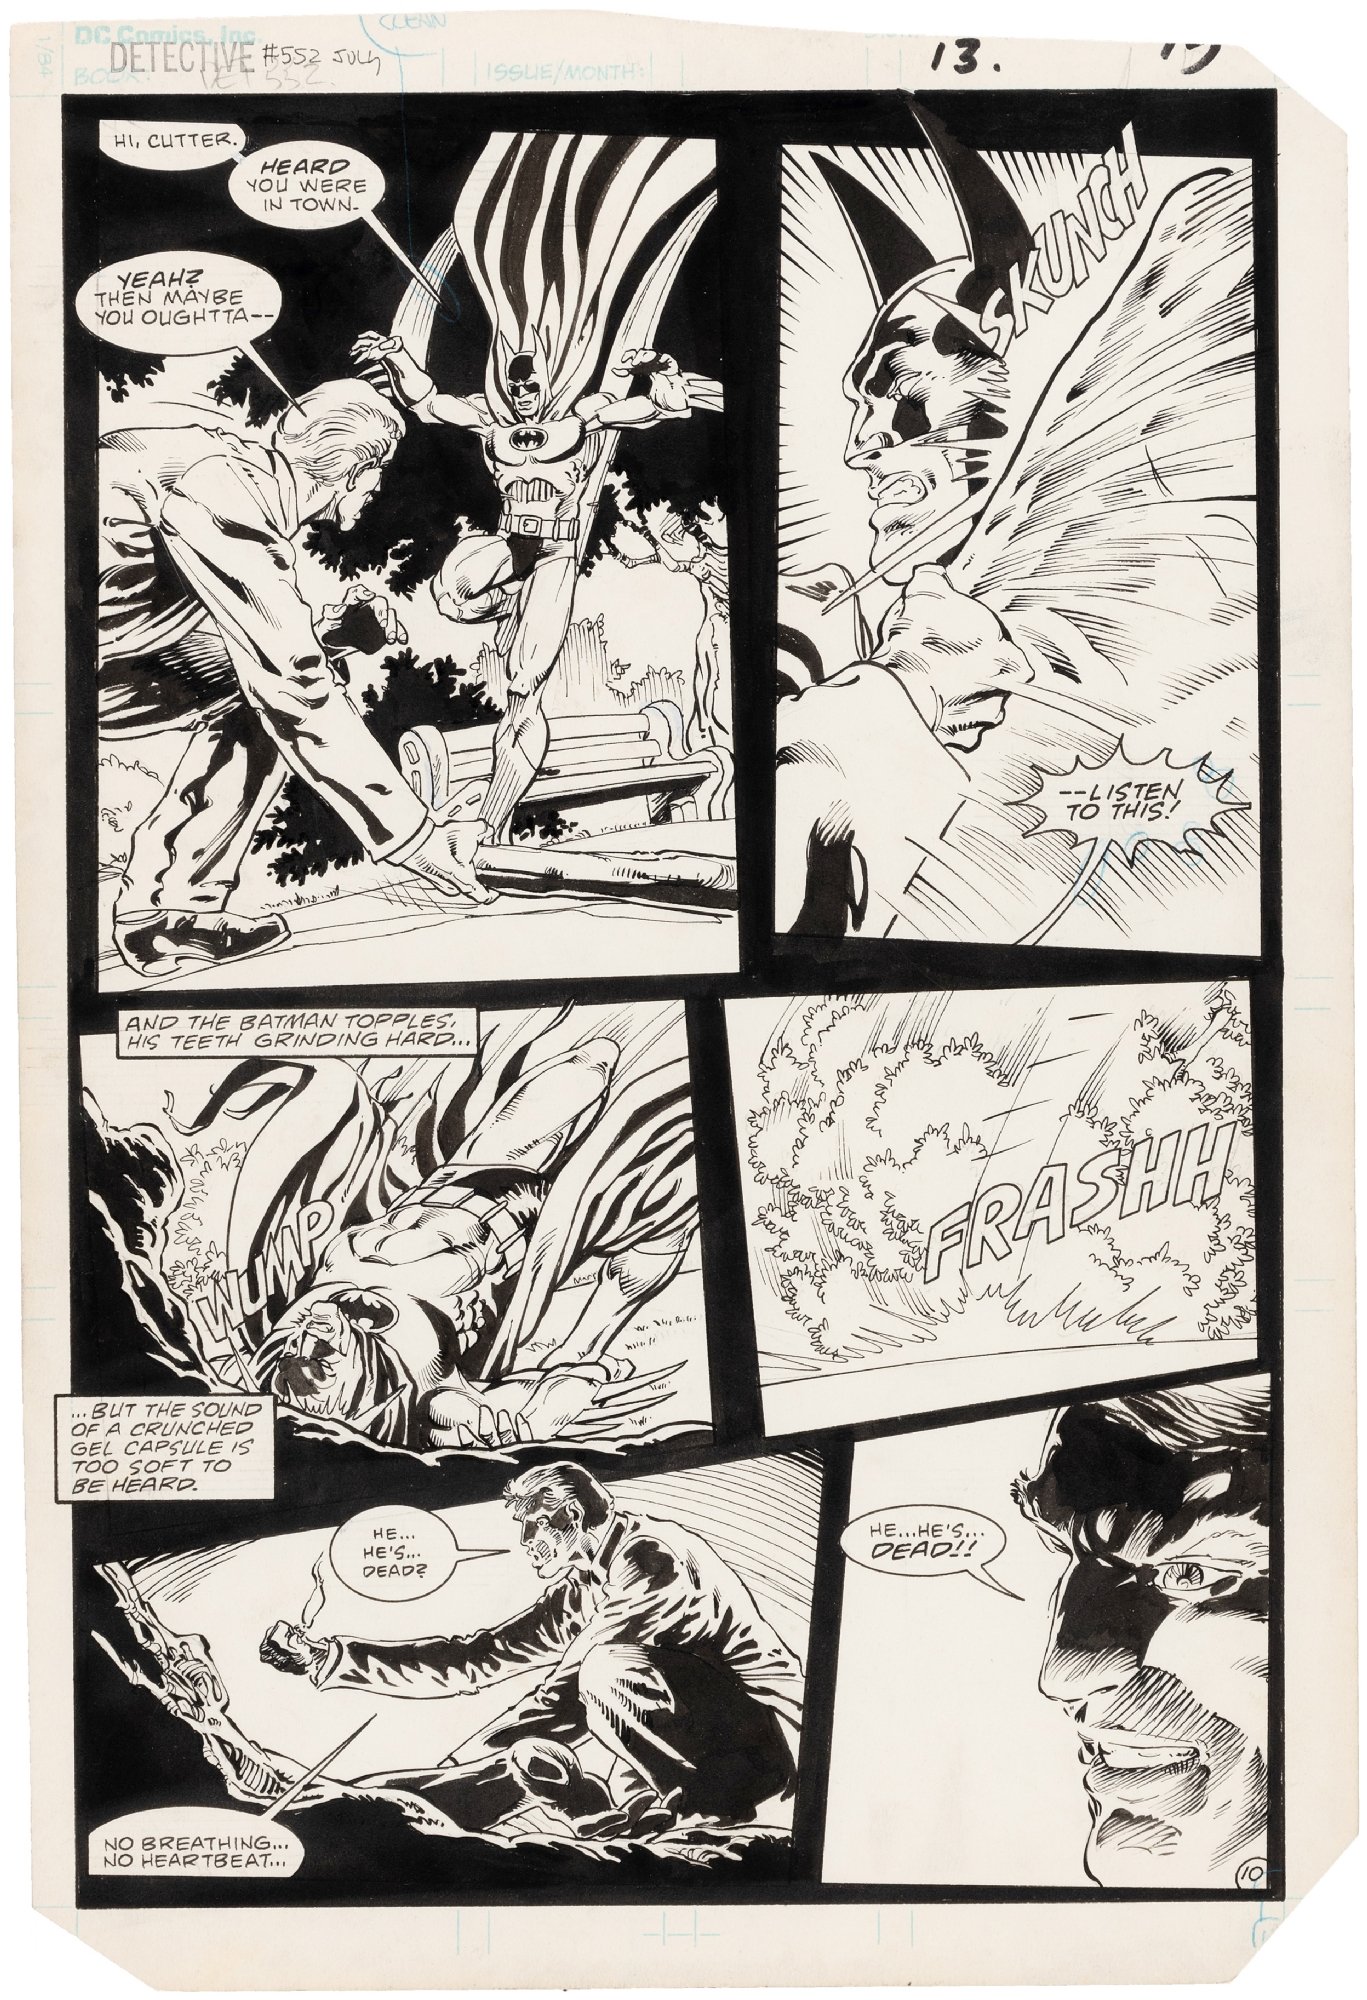 DETECTIVE COMICS VOL. 1 #552 COMIC BOOK PAGE ORIGINAL ART BY PAT  BRODERICK., in Hake's Auctions's Auction #230 September 2020! Comic Art  Gallery Room